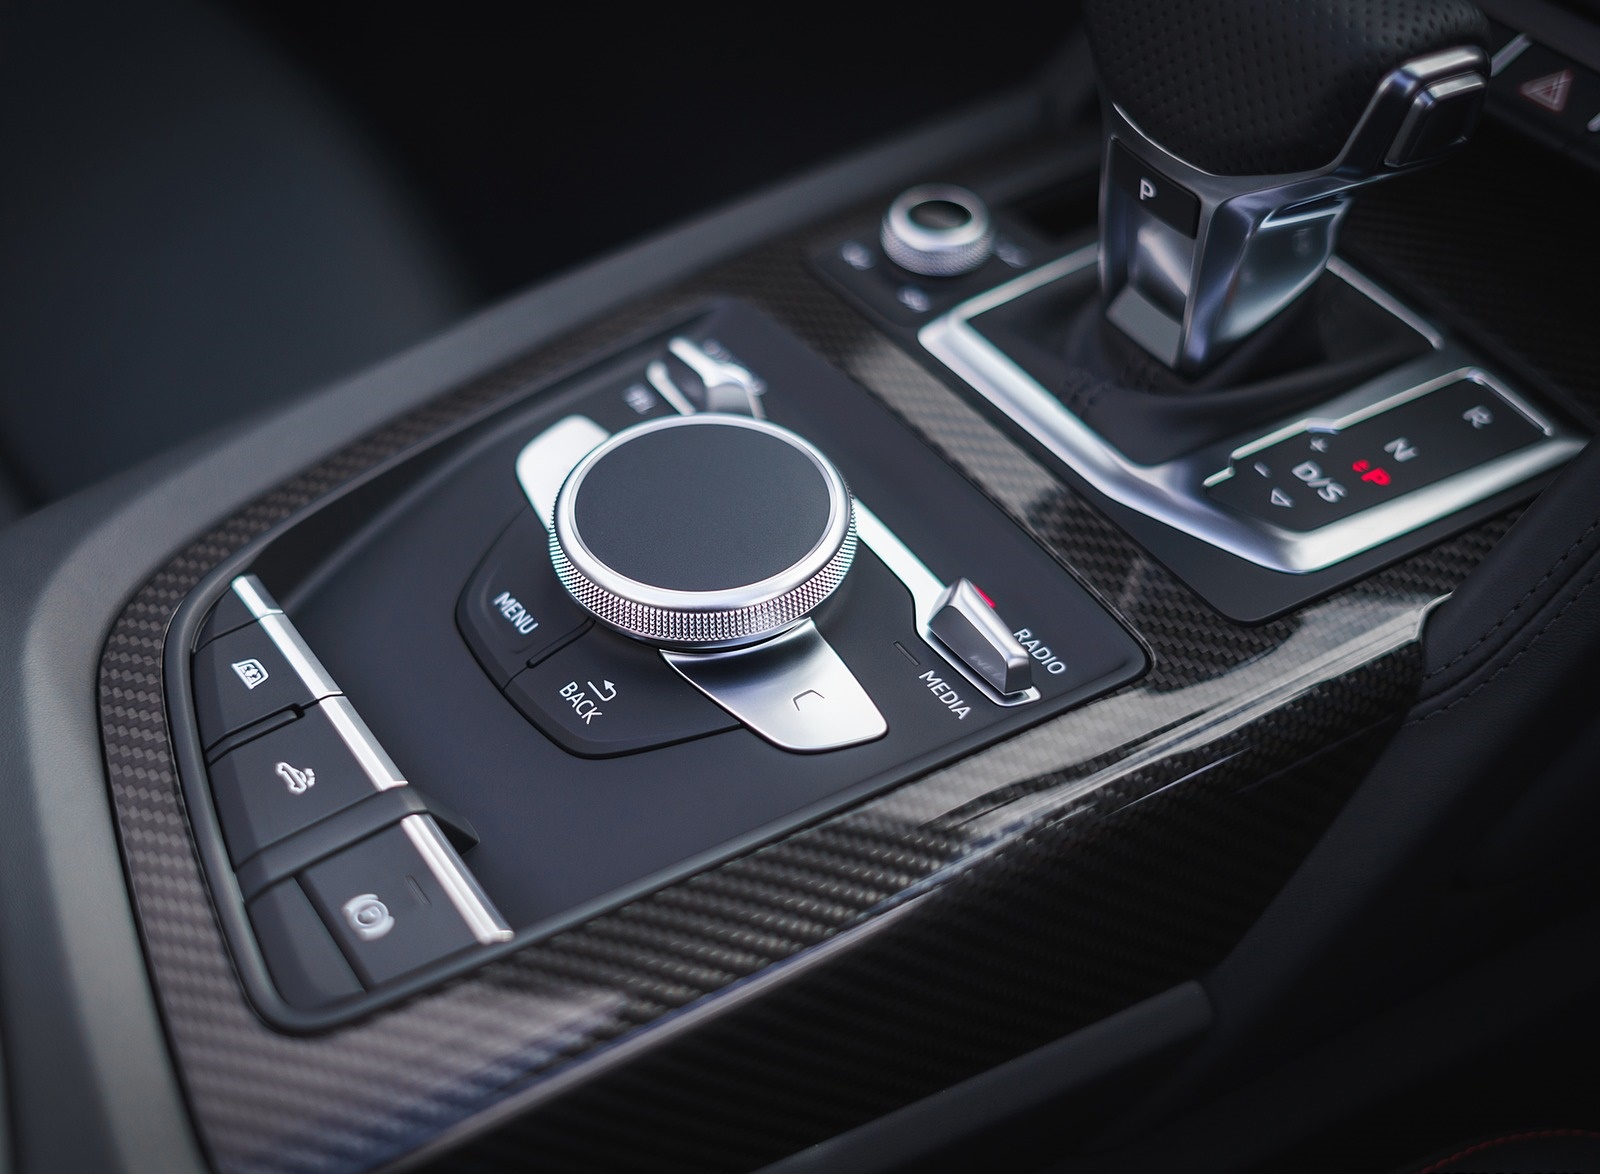 2019 Audi R8 V10 Coupe Performance quattro (UK-Spec) Interior Detail Wallpapers #193 of 199